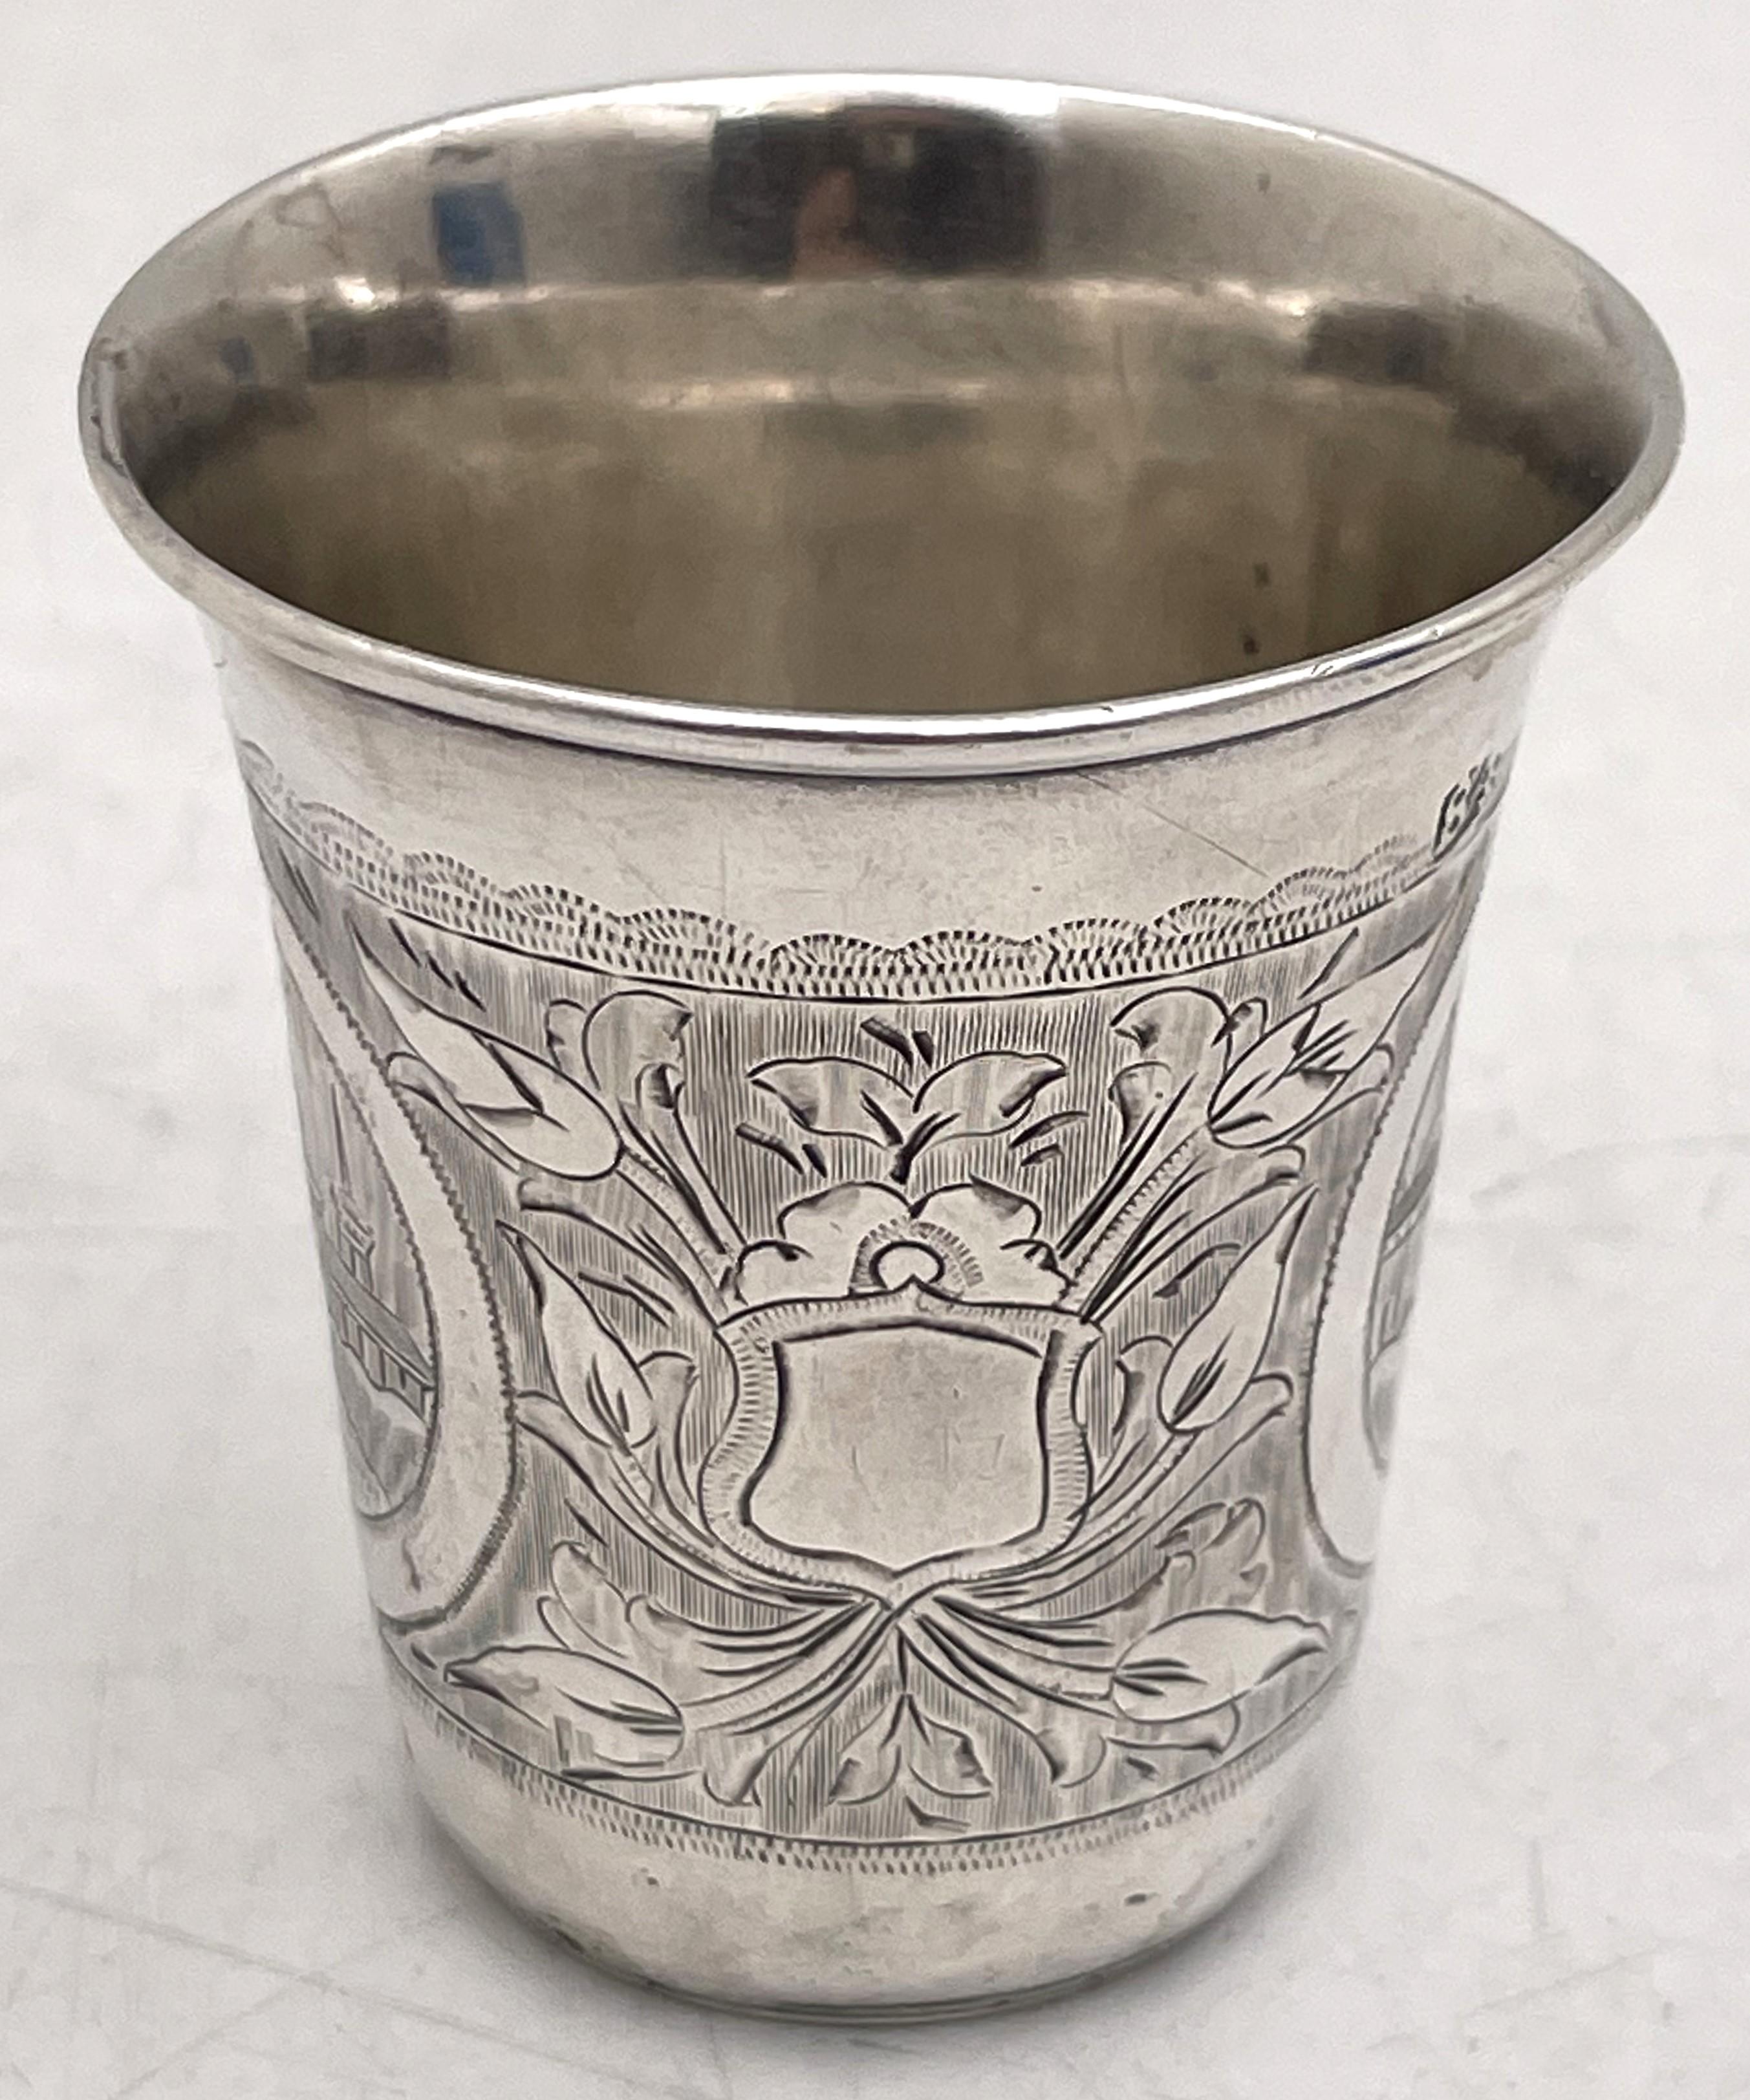 Russian 0.84 silver Kiddush cup from the mid- to late 19th century (possibly 1869?)  showcasing stylized natural and architectural motifs. It measures 2 1/3'' in height by 2 1/8'' in diameter at the top and bear hallmarks as shown. 

Please feel